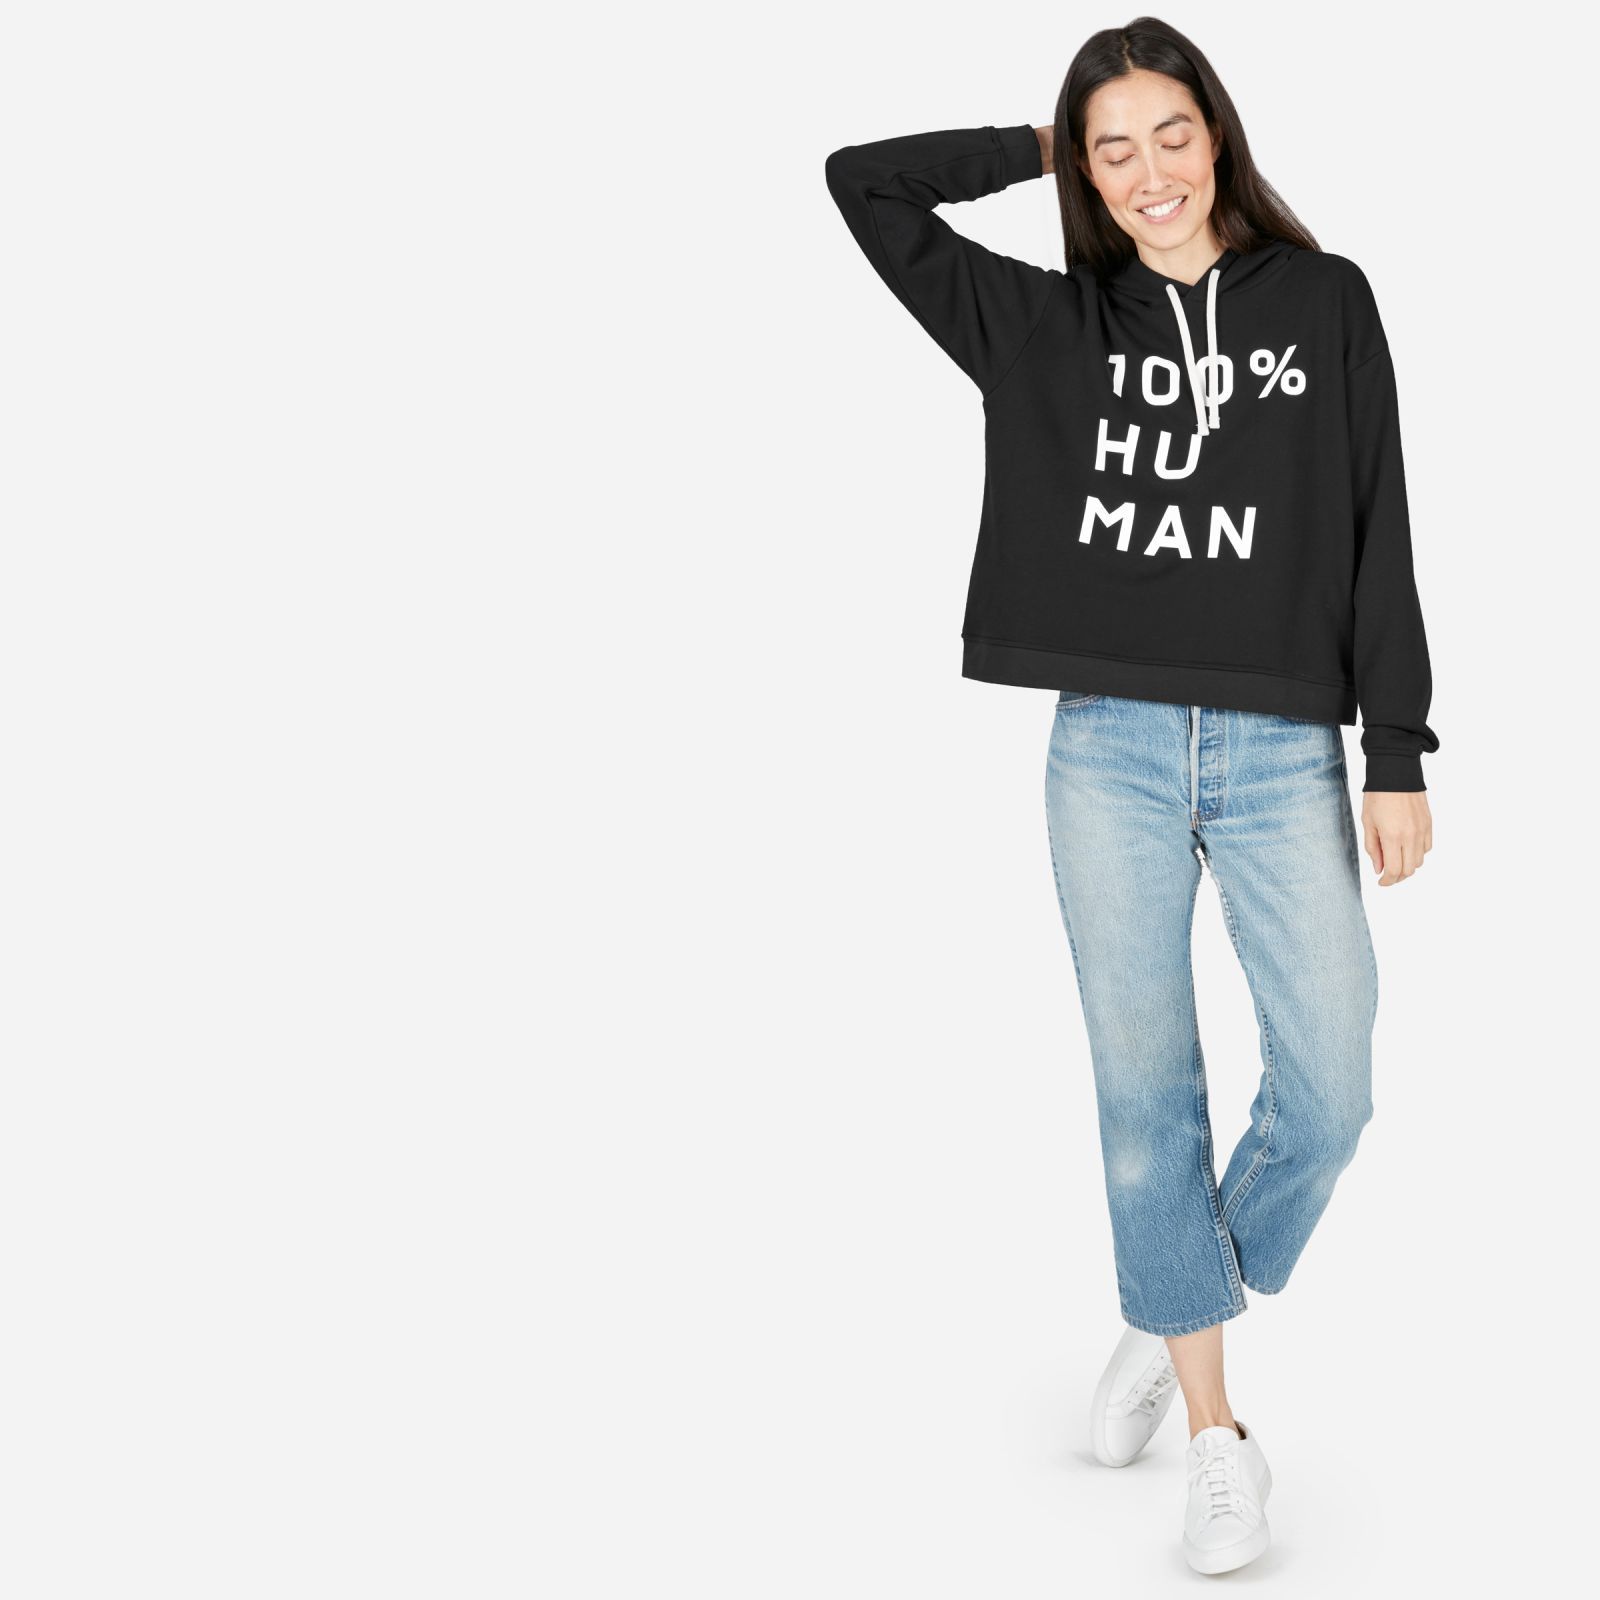 Women's 100% Human French Terry Hoodie in Large Print by Everlane in Black, Size XXS | Everlane